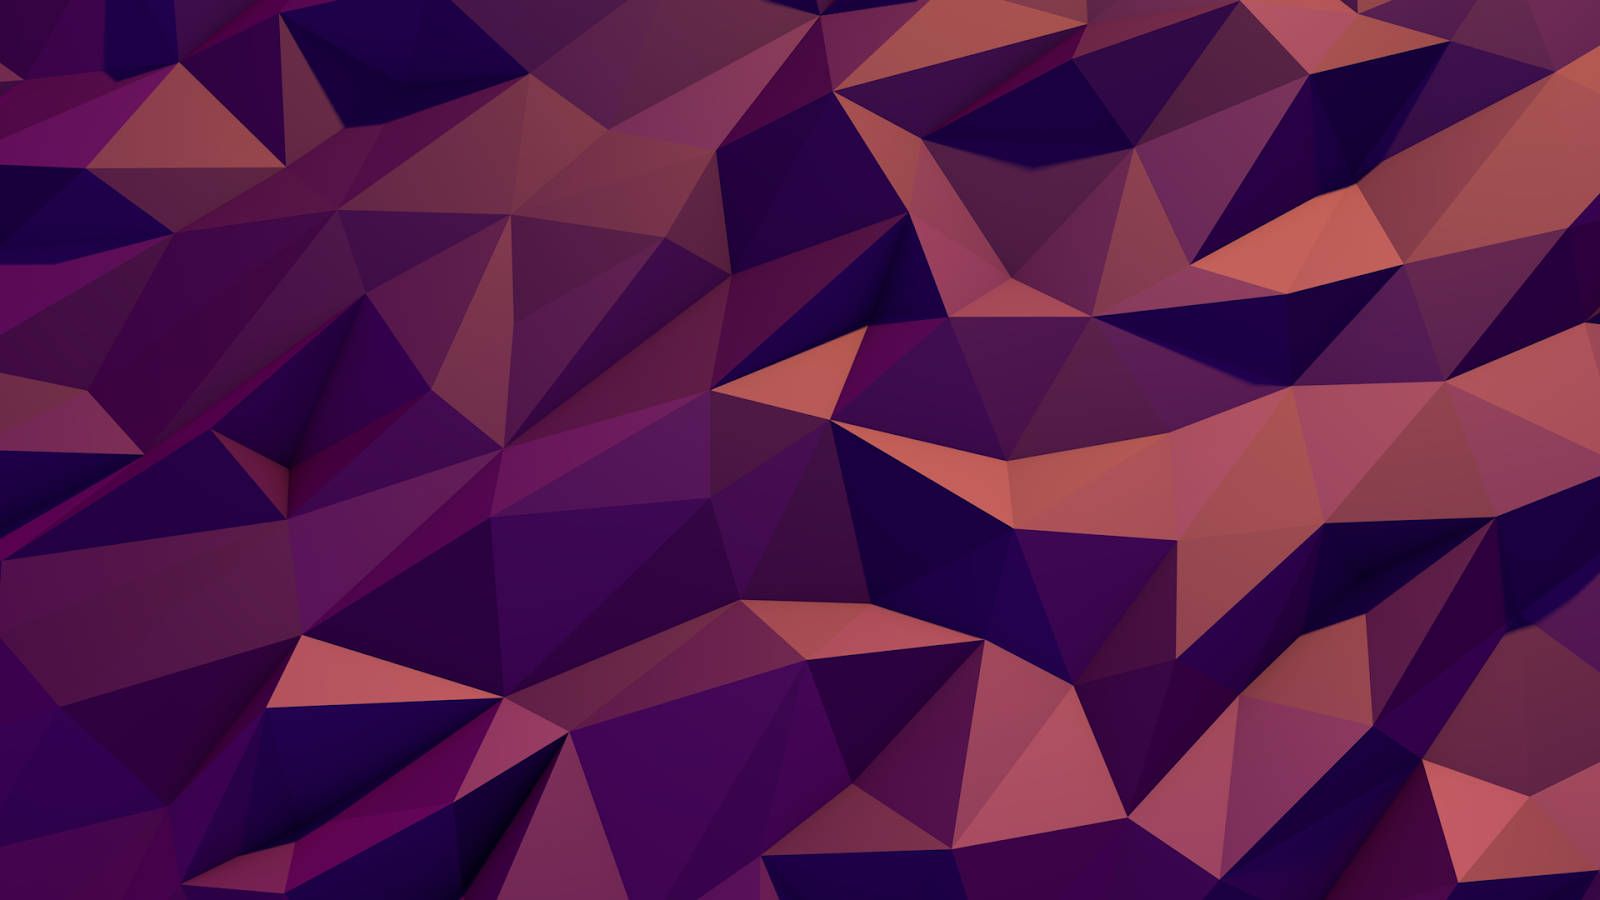 Free Low Poly Wallpaper Downloads, Low Poly Wallpaper for FREE